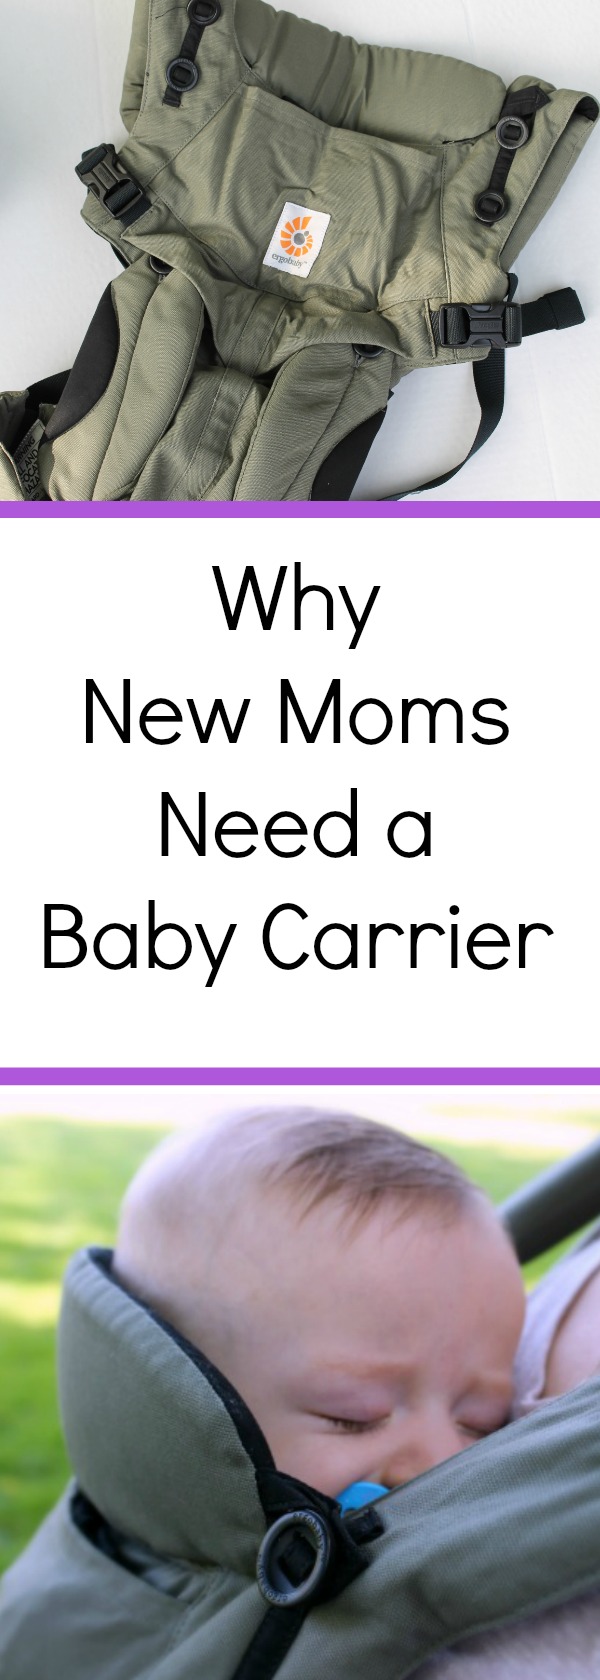 AD: Thinking about babywearing? Wondering what baby essentials you need? Here are several reasons Why New Moms Need a Baby Carrier. #Ergobaby #LoveCarriesOn #babywearing #babies #newmoms